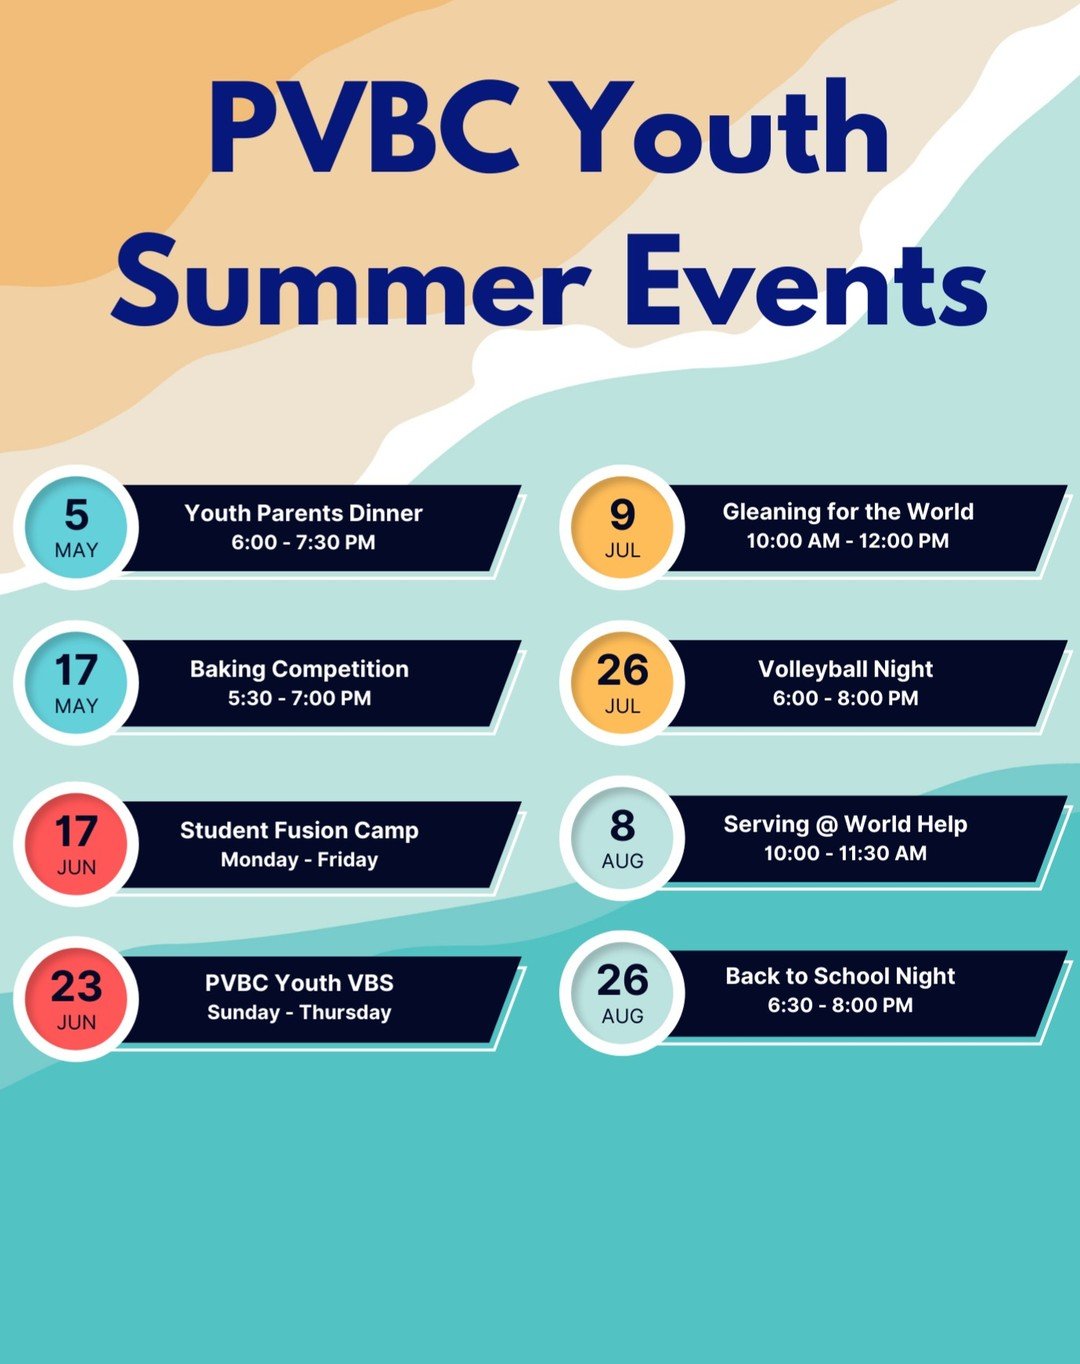 Check out our upcoming Summer Youth Events!